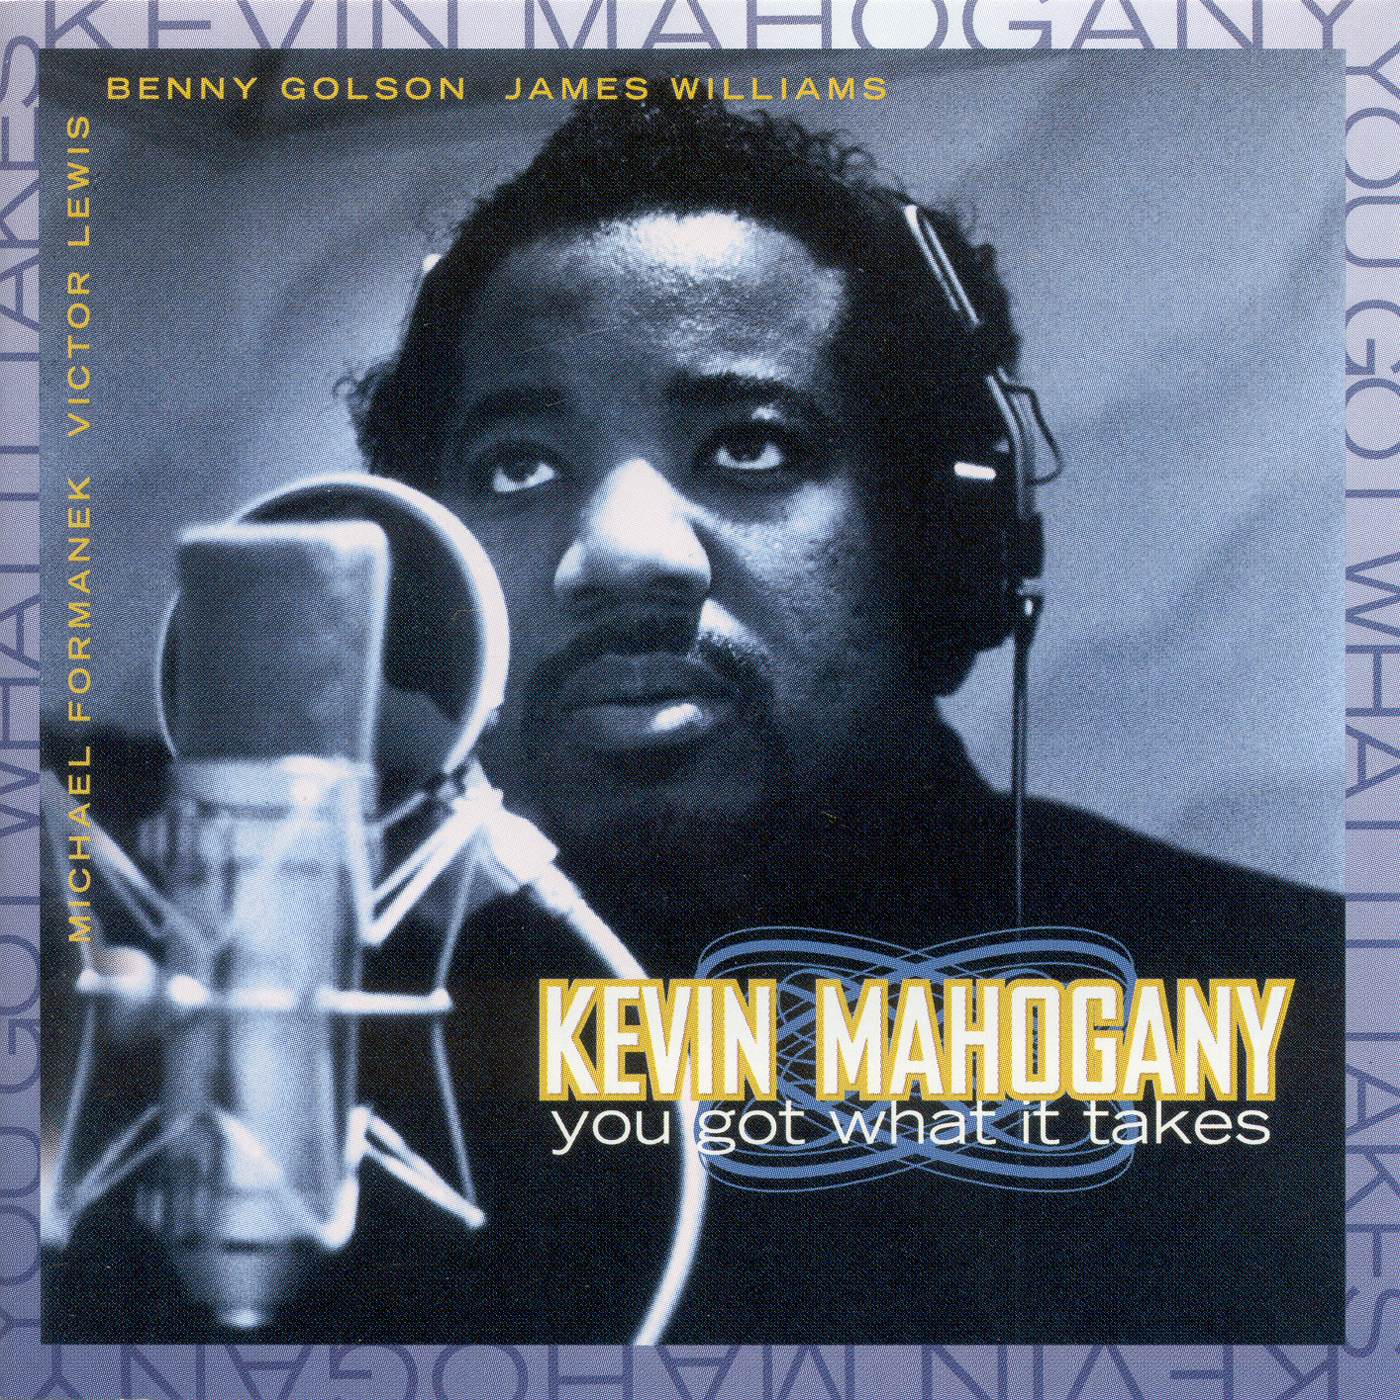 Kevin Mahogany YOU GOT WHAT IT TAKES CD